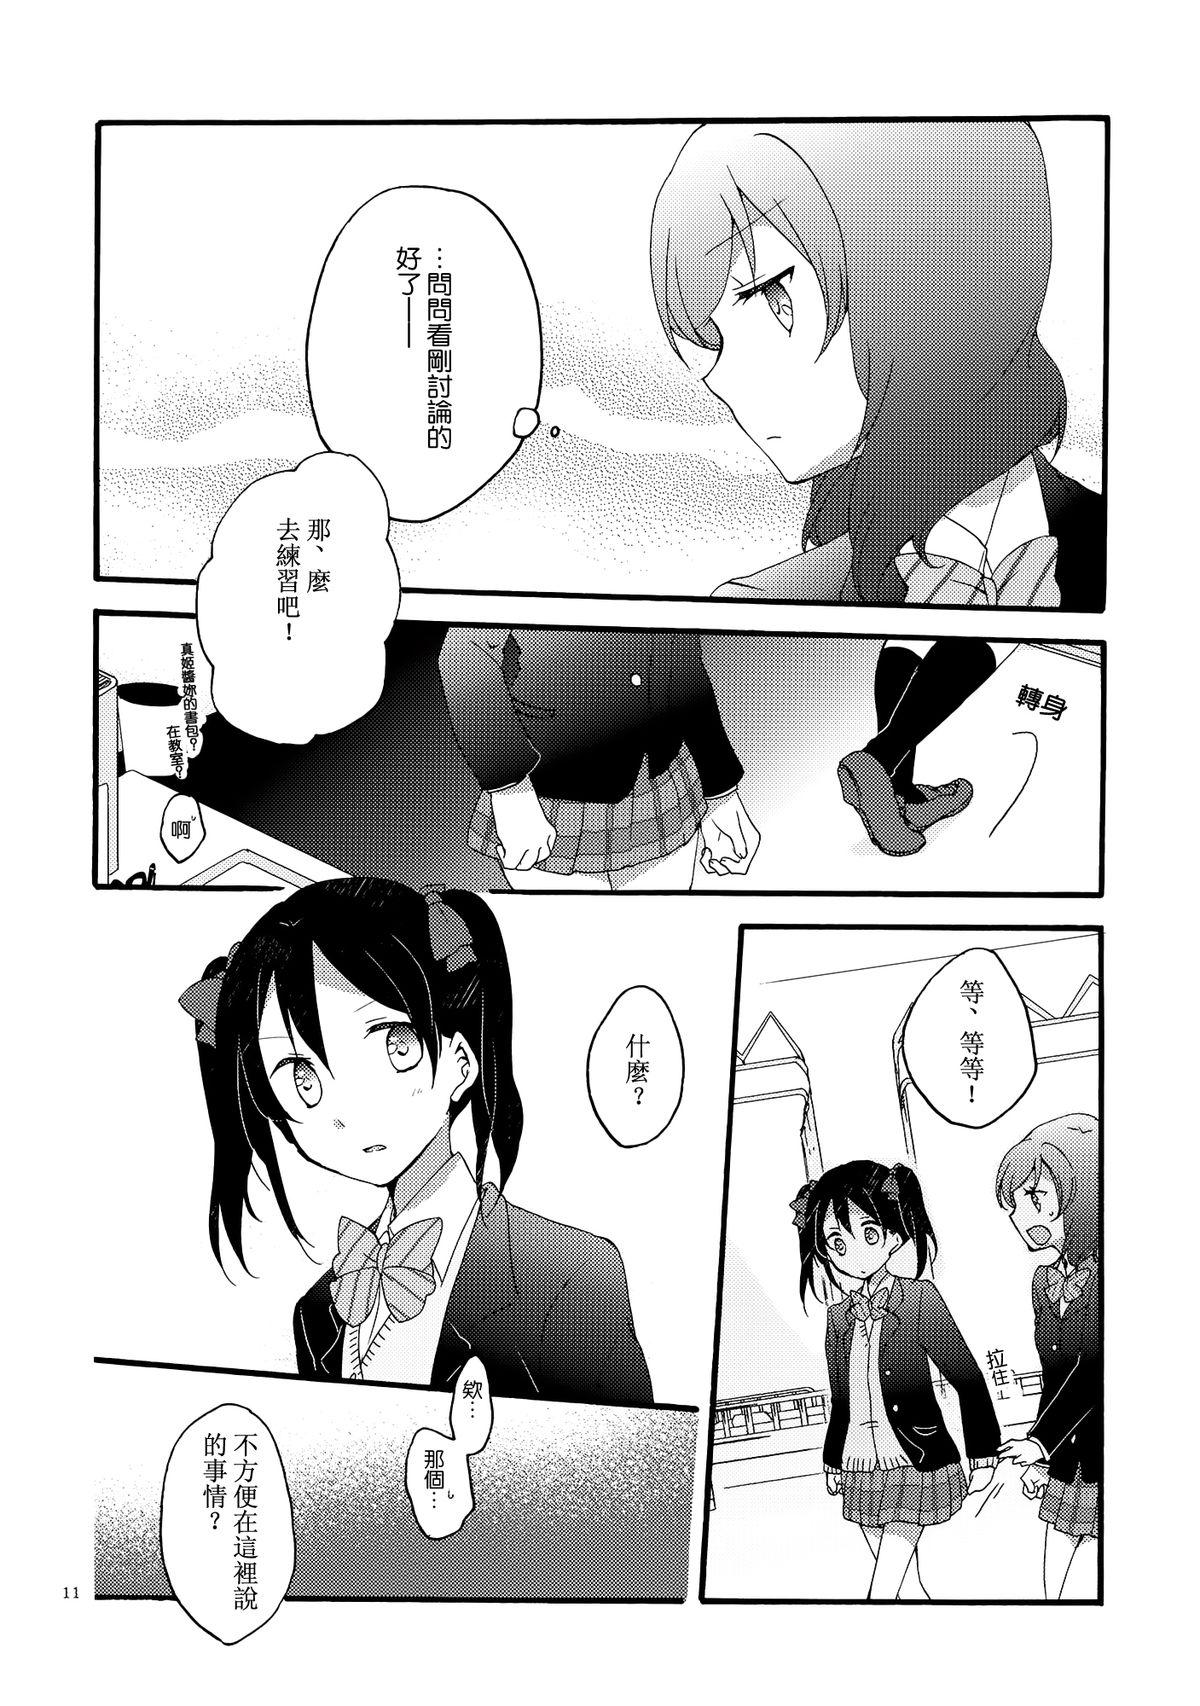 Polla Lovesick Girl - Love live Interacial - Page 10